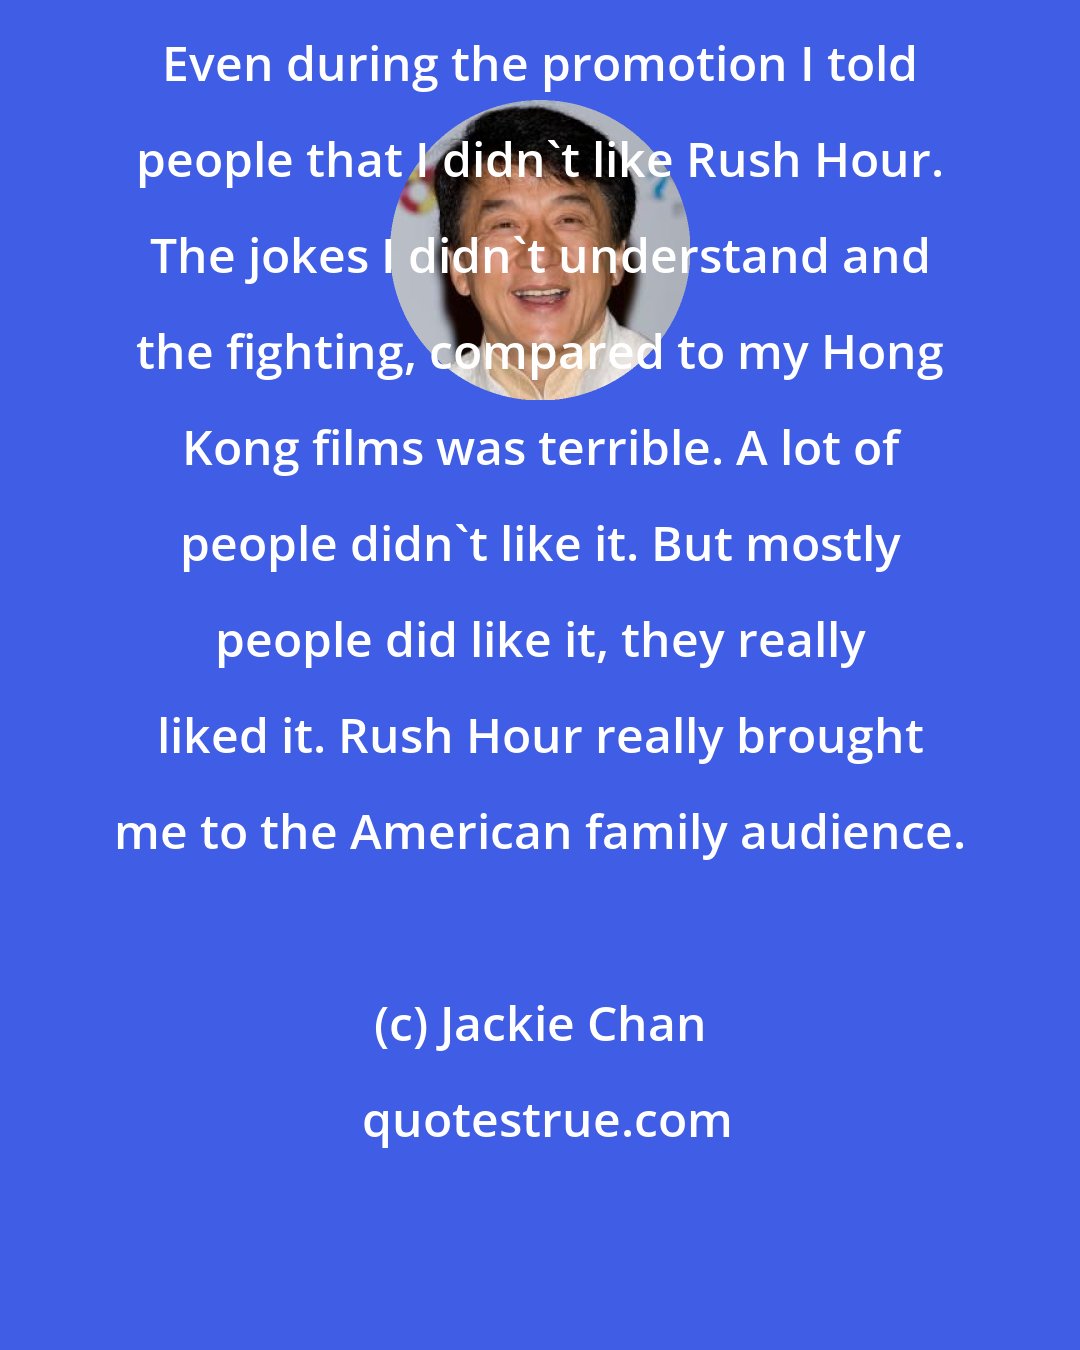 Jackie Chan: Even during the promotion I told people that I didn't like Rush Hour. The jokes I didn't understand and the fighting, compared to my Hong Kong films was terrible. A lot of people didn't like it. But mostly people did like it, they really liked it. Rush Hour really brought me to the American family audience.